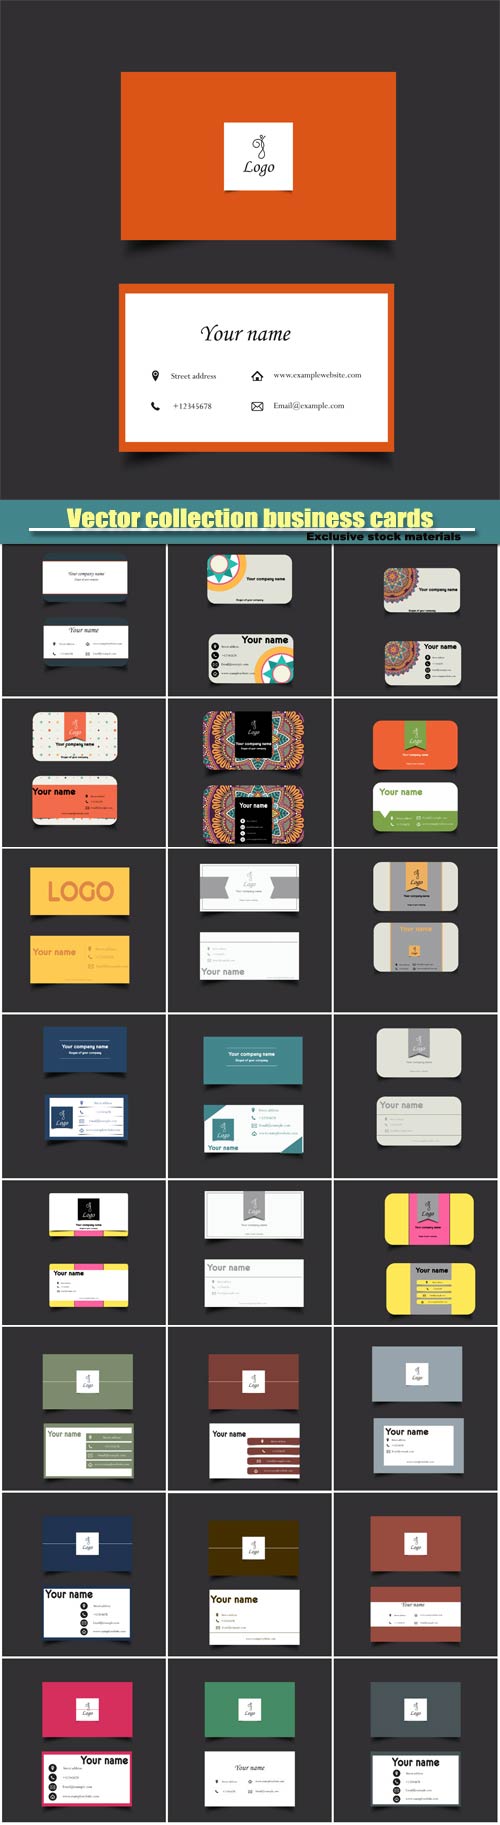 Vector collection business cards